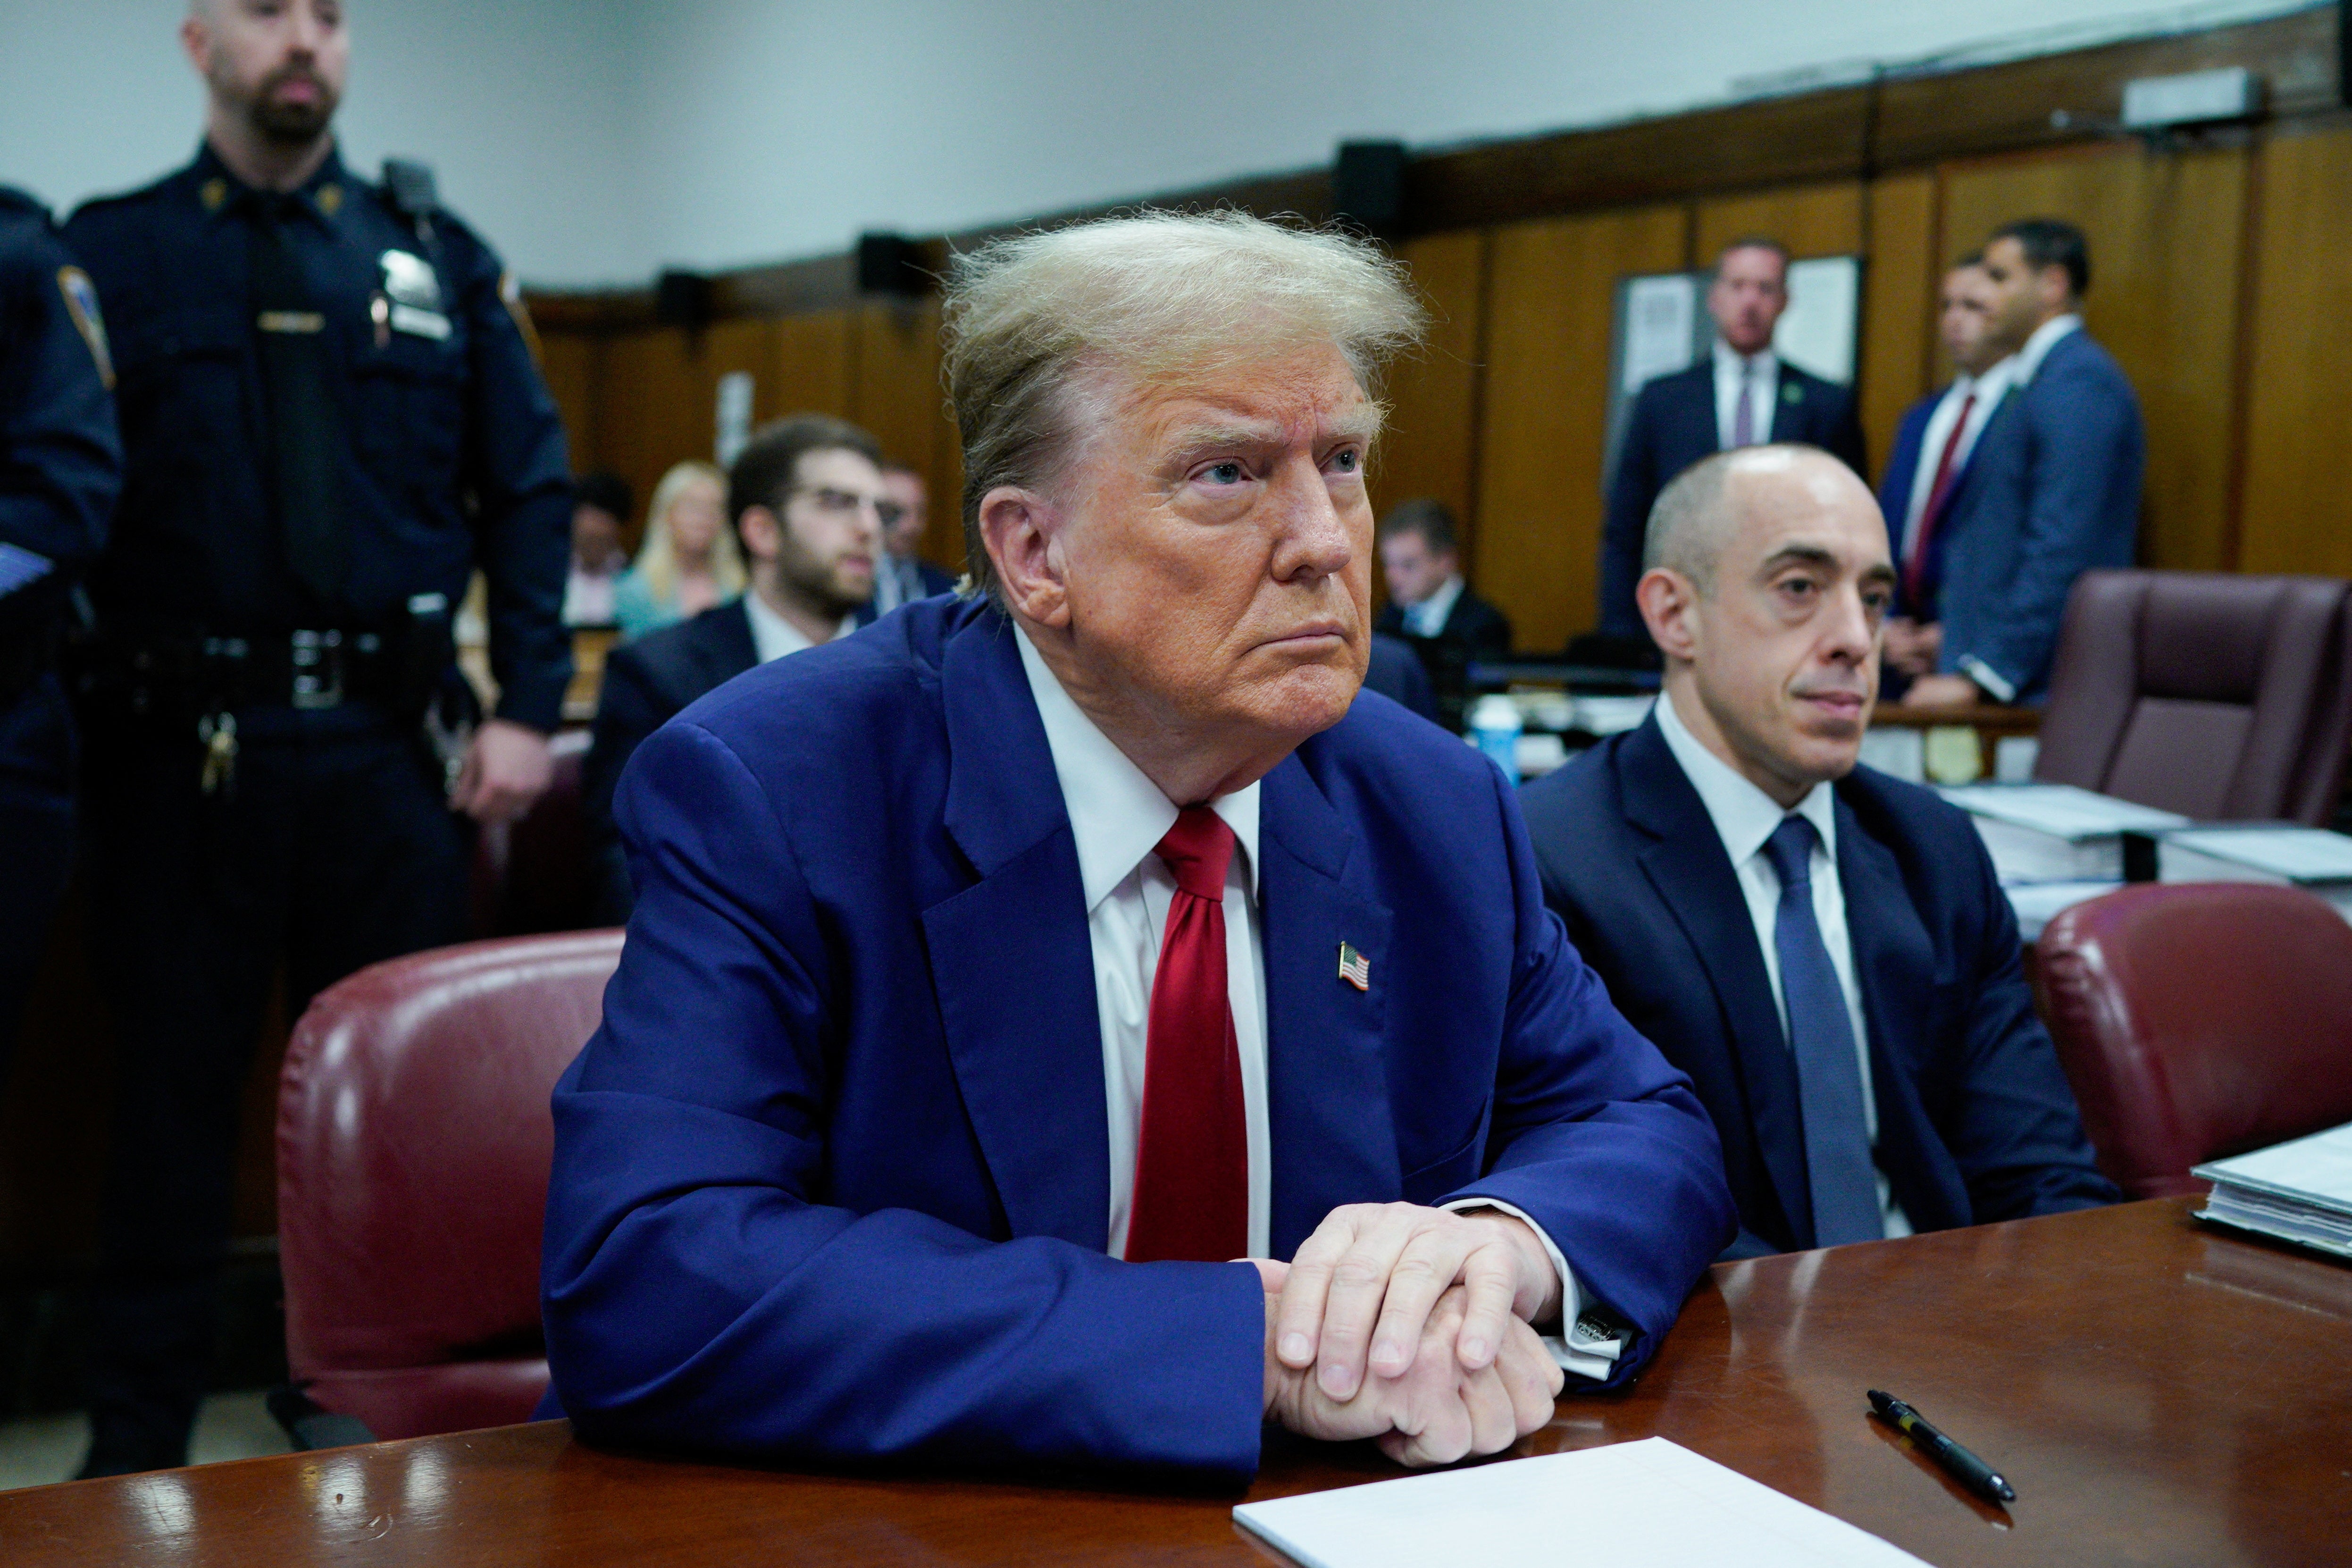 Donald Trump in court for his criminal trial